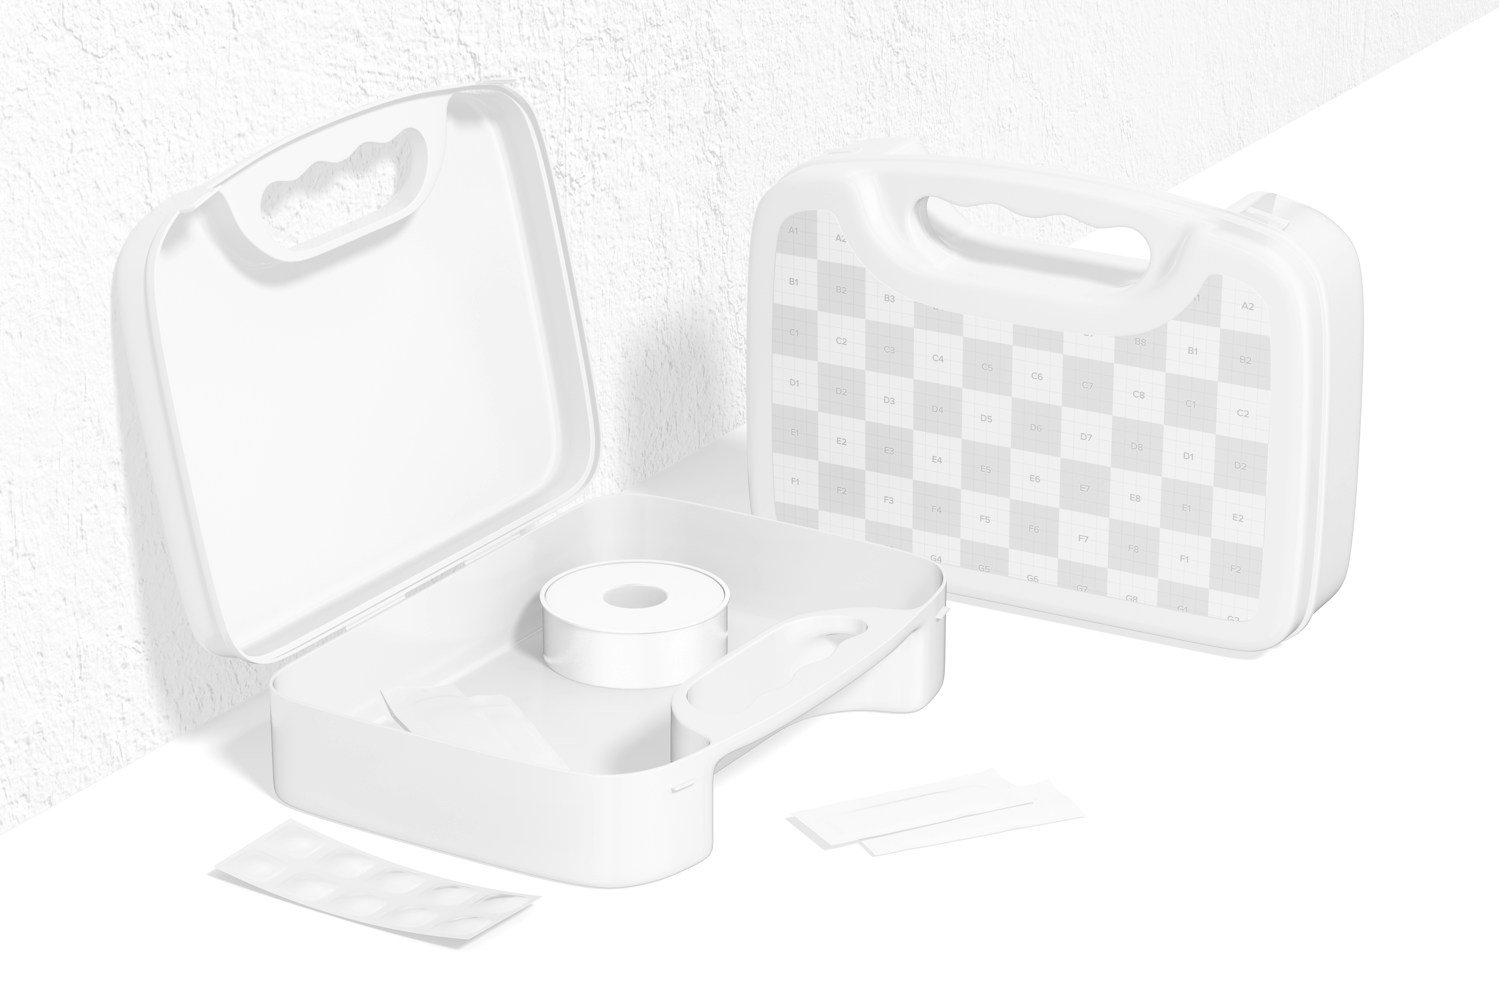 First Aid Kit with Handle Mockup, Opened and Closed